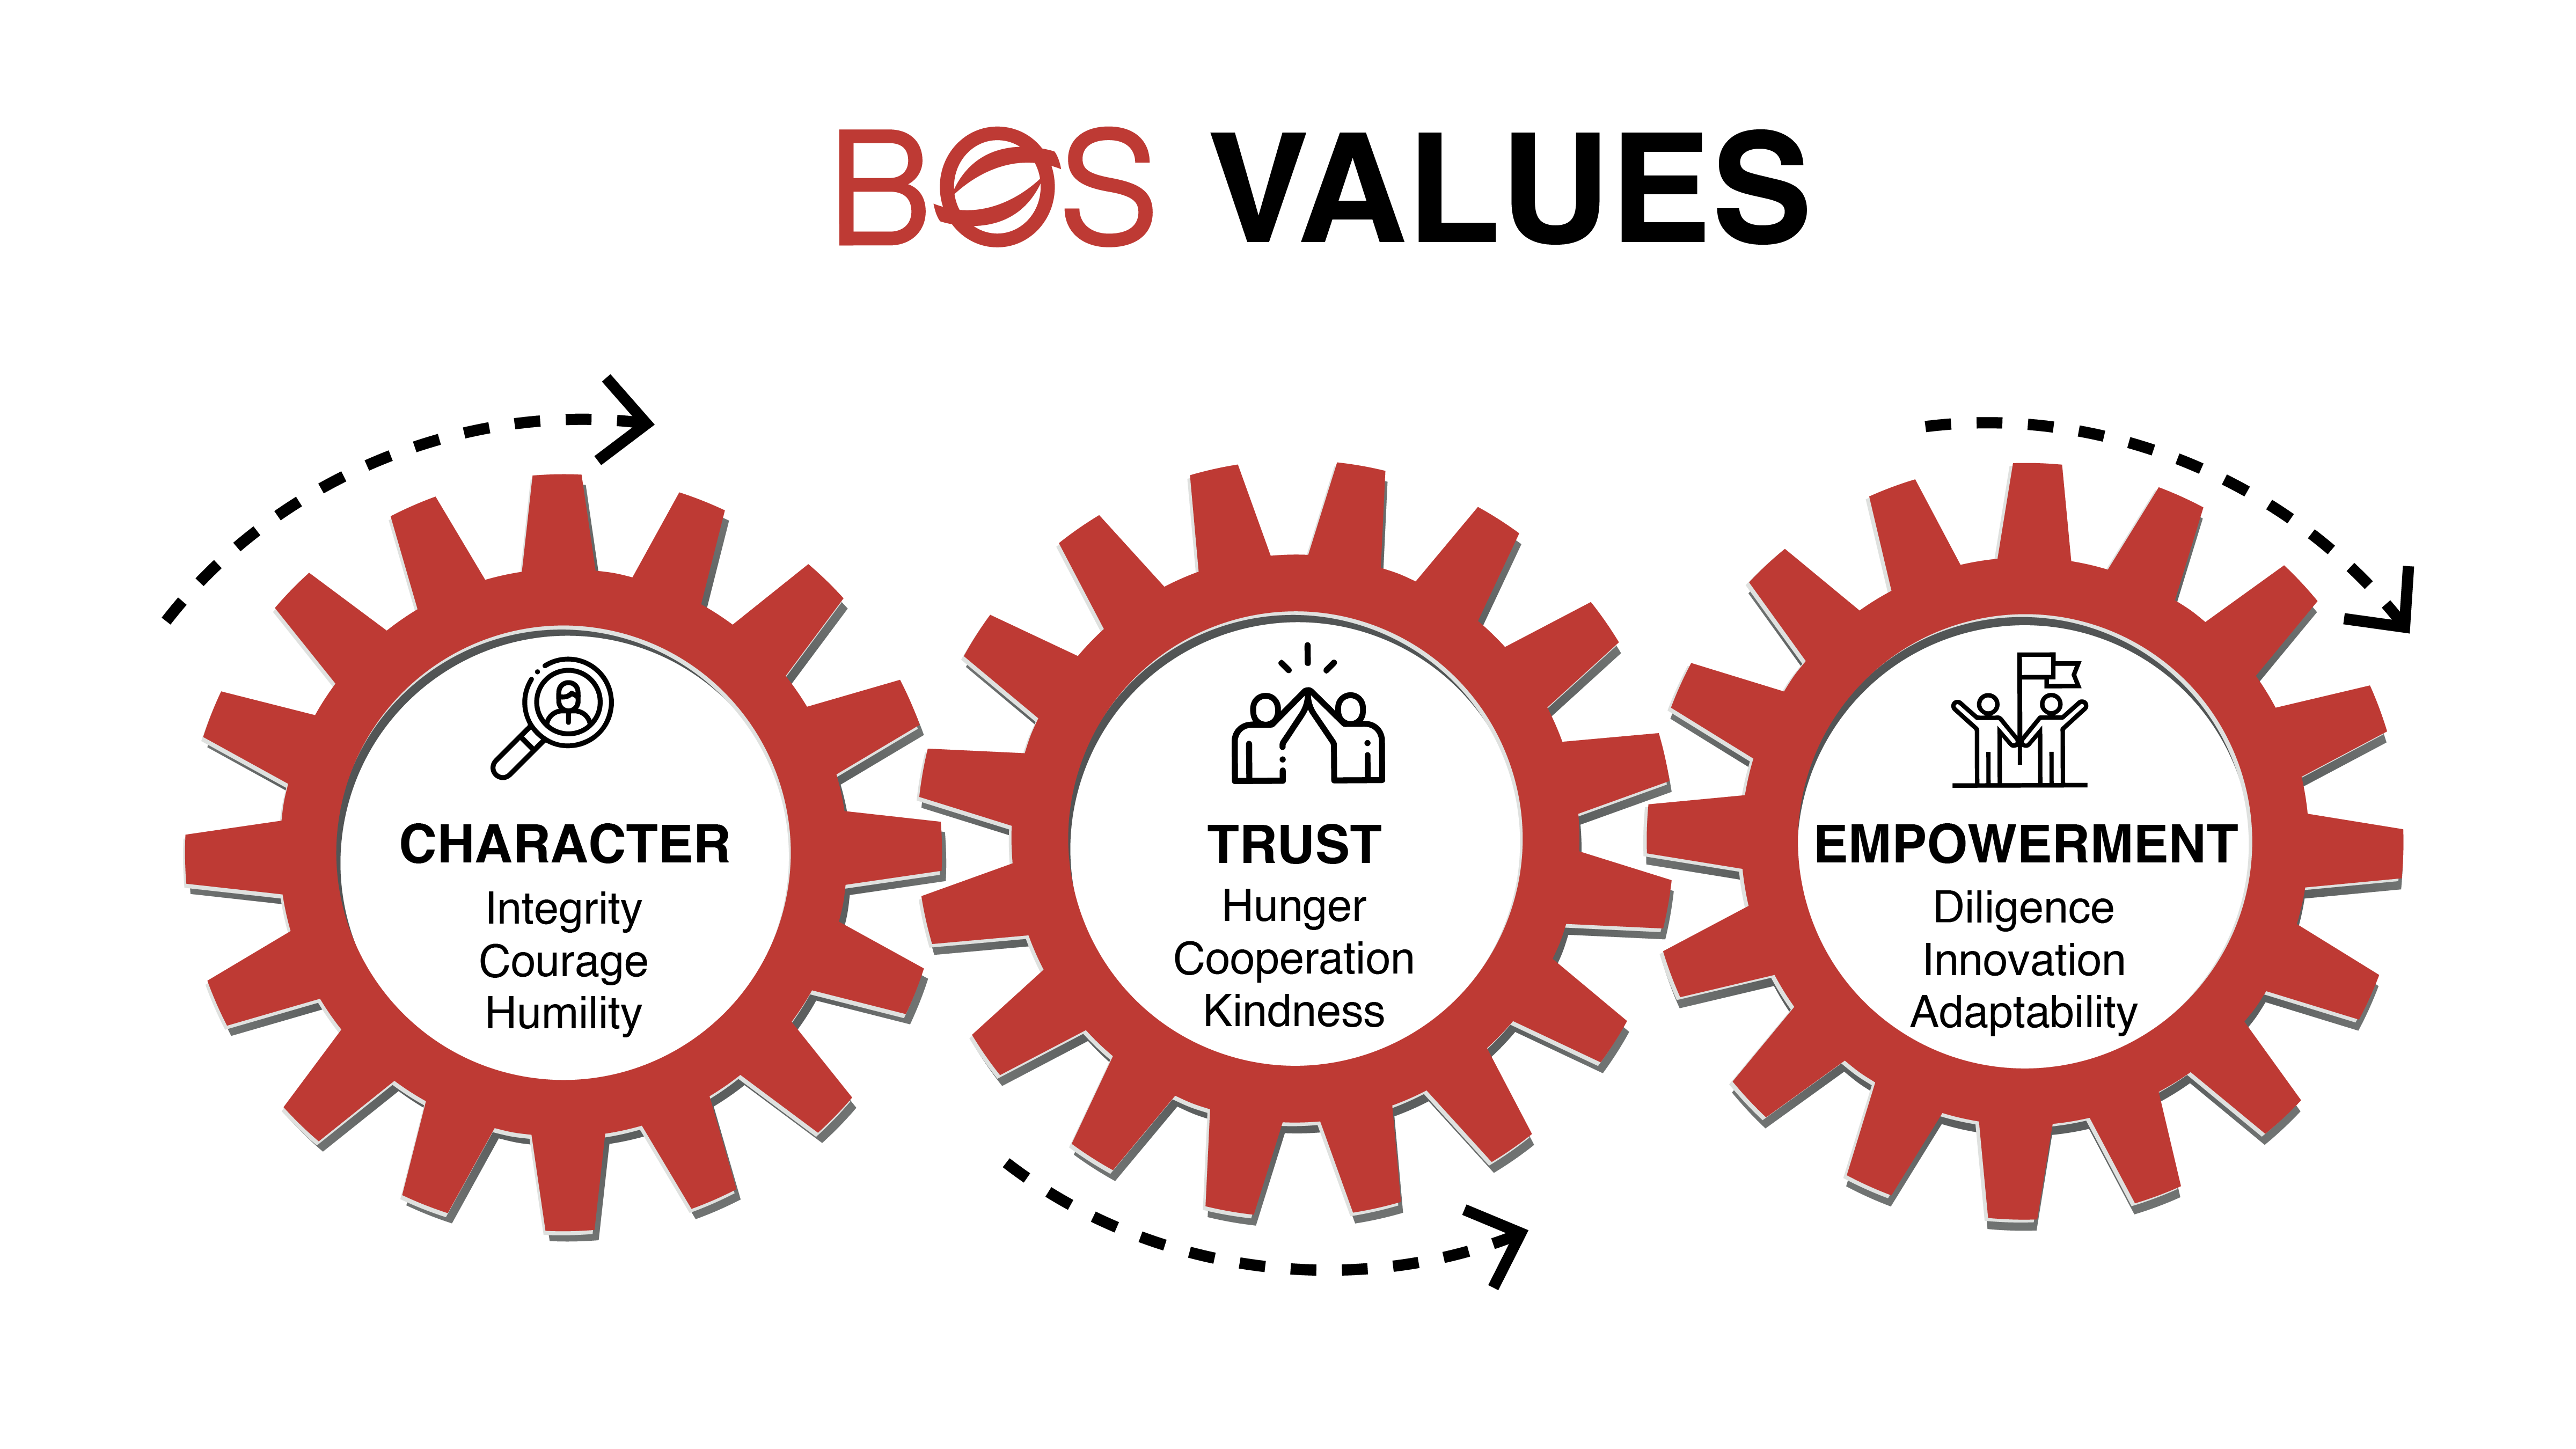 3 Gears showing how the BOS Values are connected